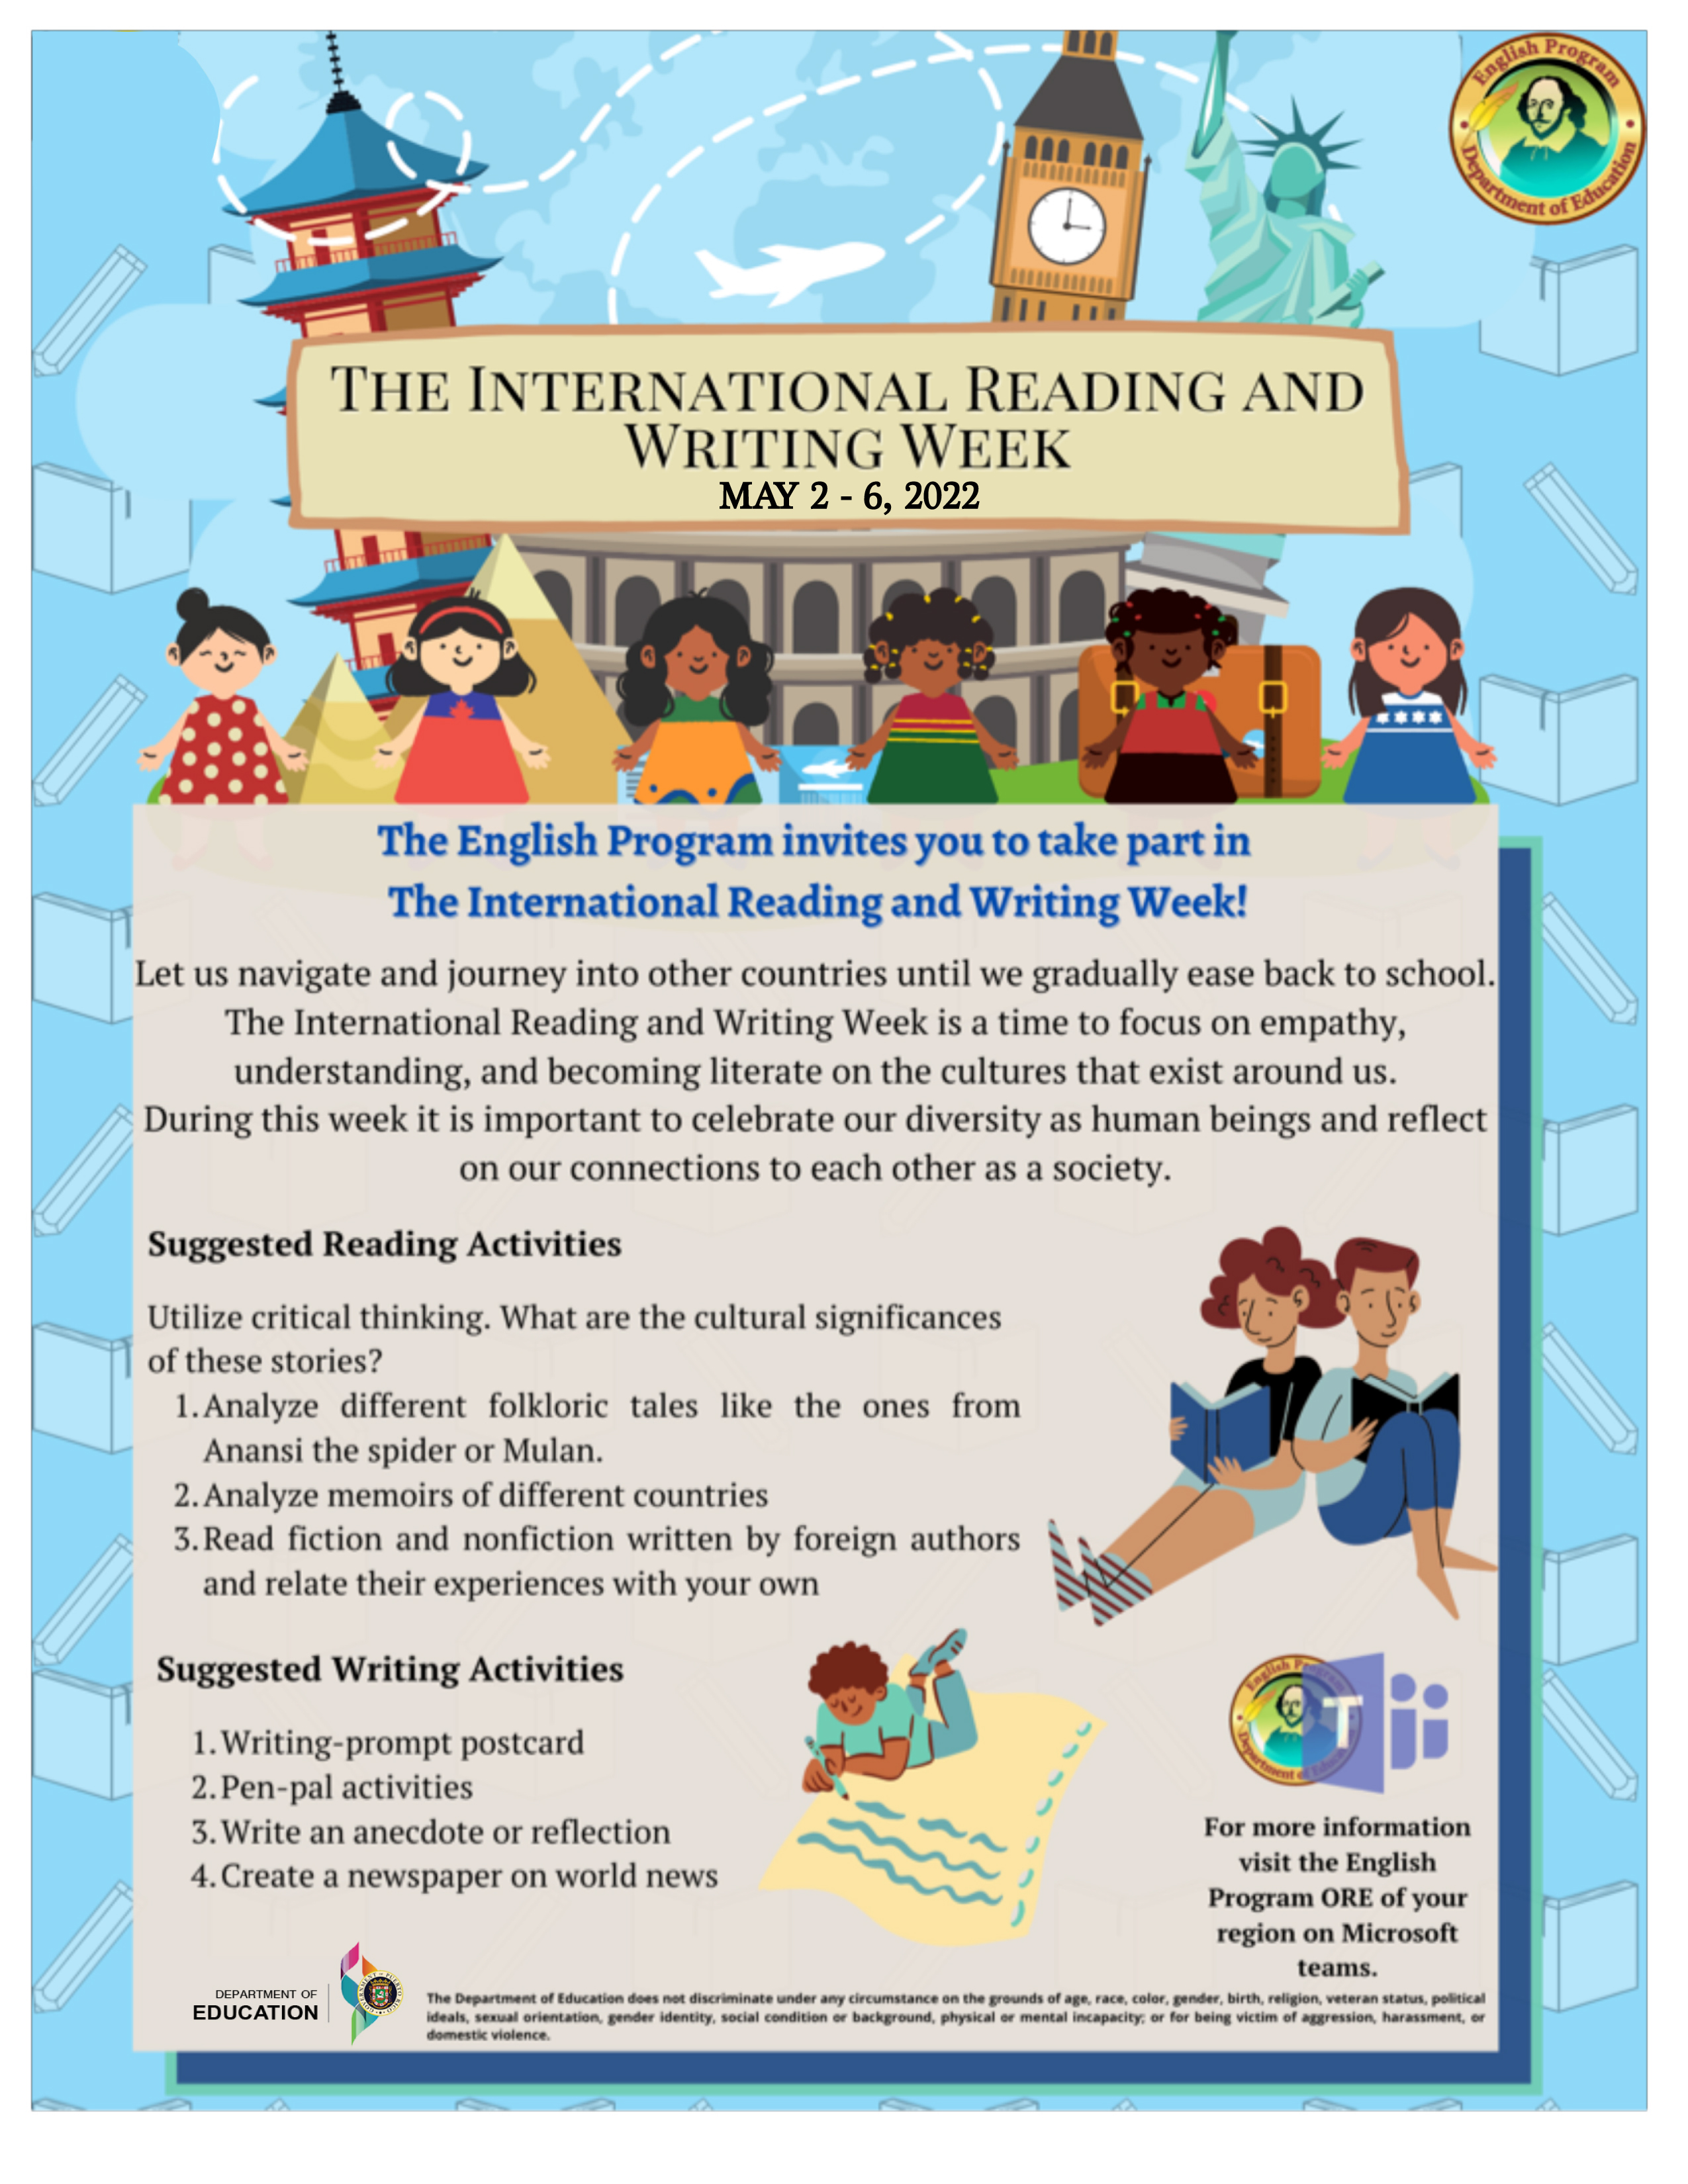 The International Reading and Writing Week